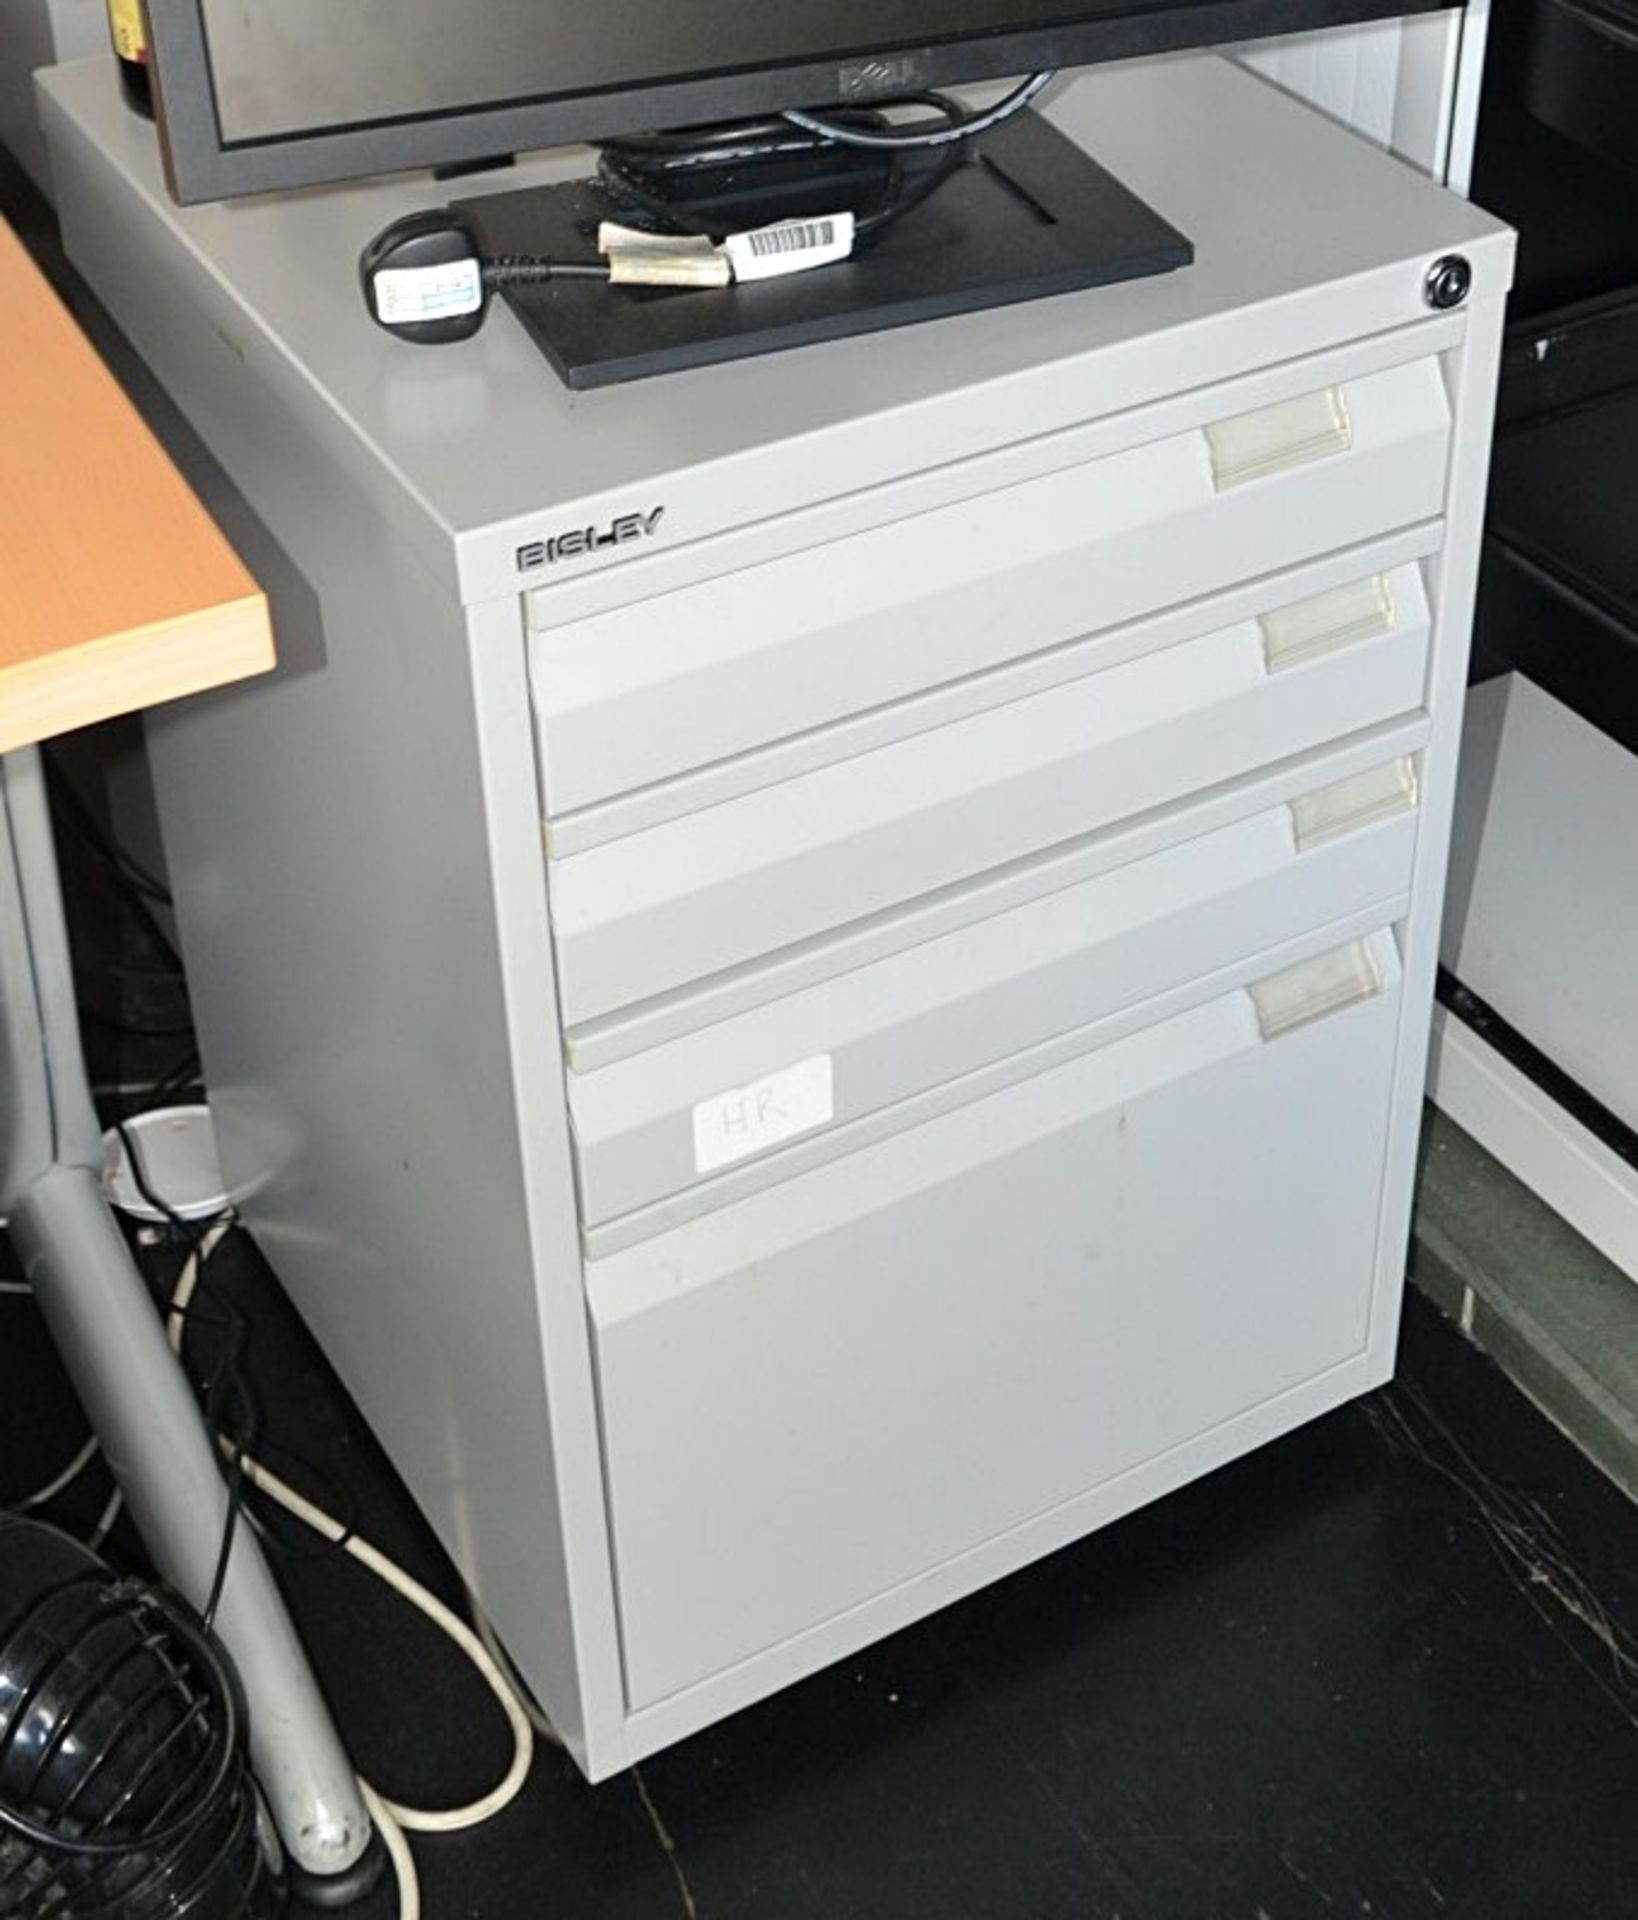 4 x Assorted Metal Office Filing Cabinets - Dimensions: W47 x 47 x 73cm - CL392 - Ref LD340/LD342 4F - Image 2 of 4